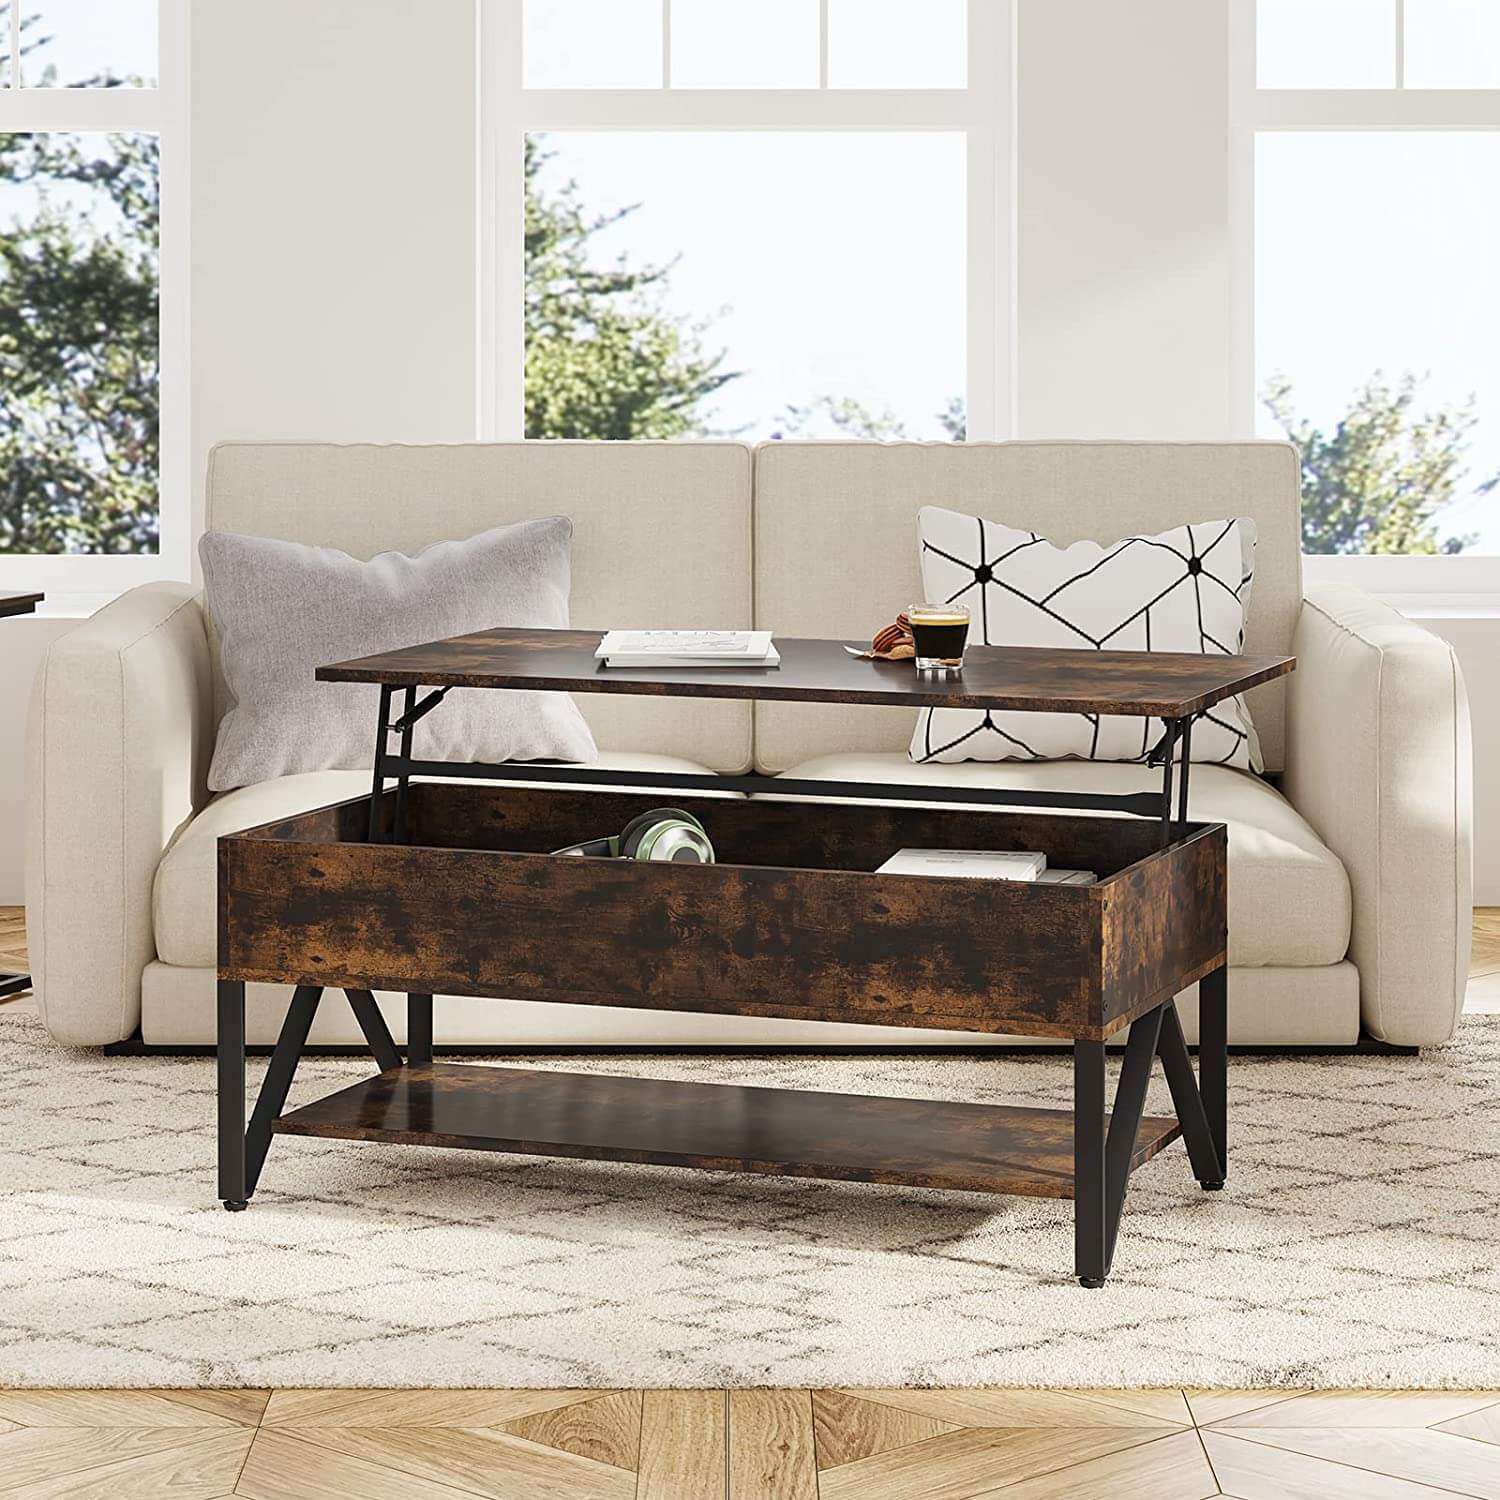 Shaped Legs Coffee Table with Pop-up Storage Space